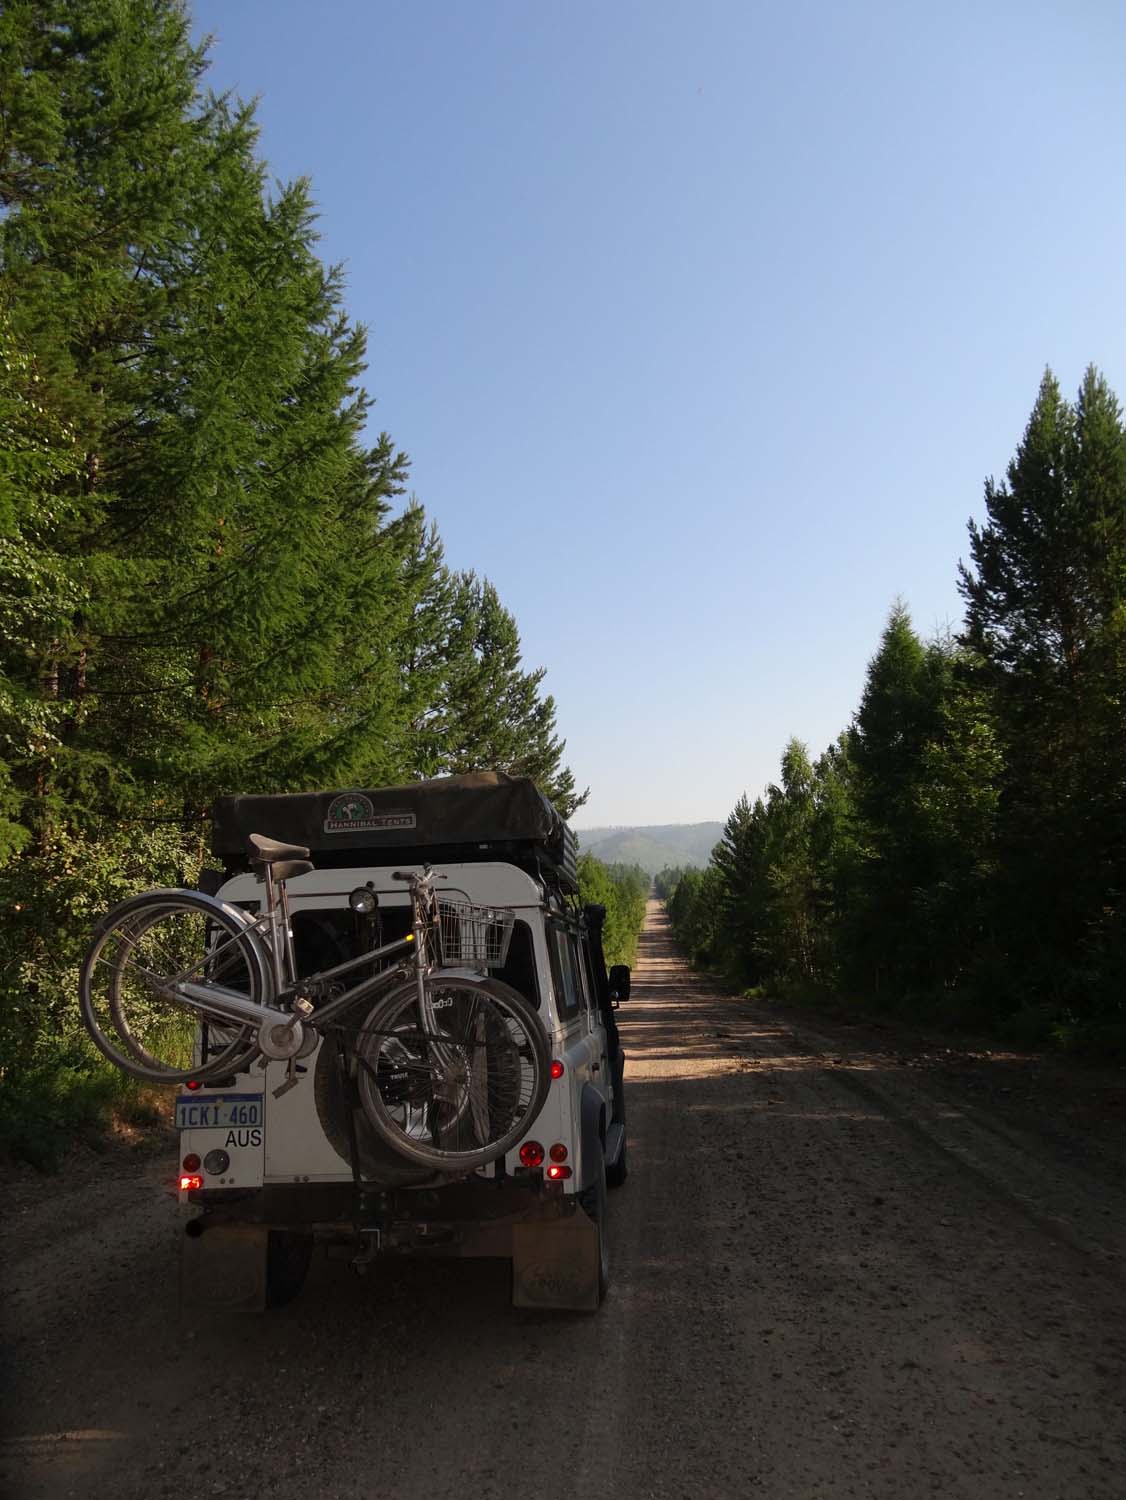 weird driving in pine forests after the emptiness of Mongolia